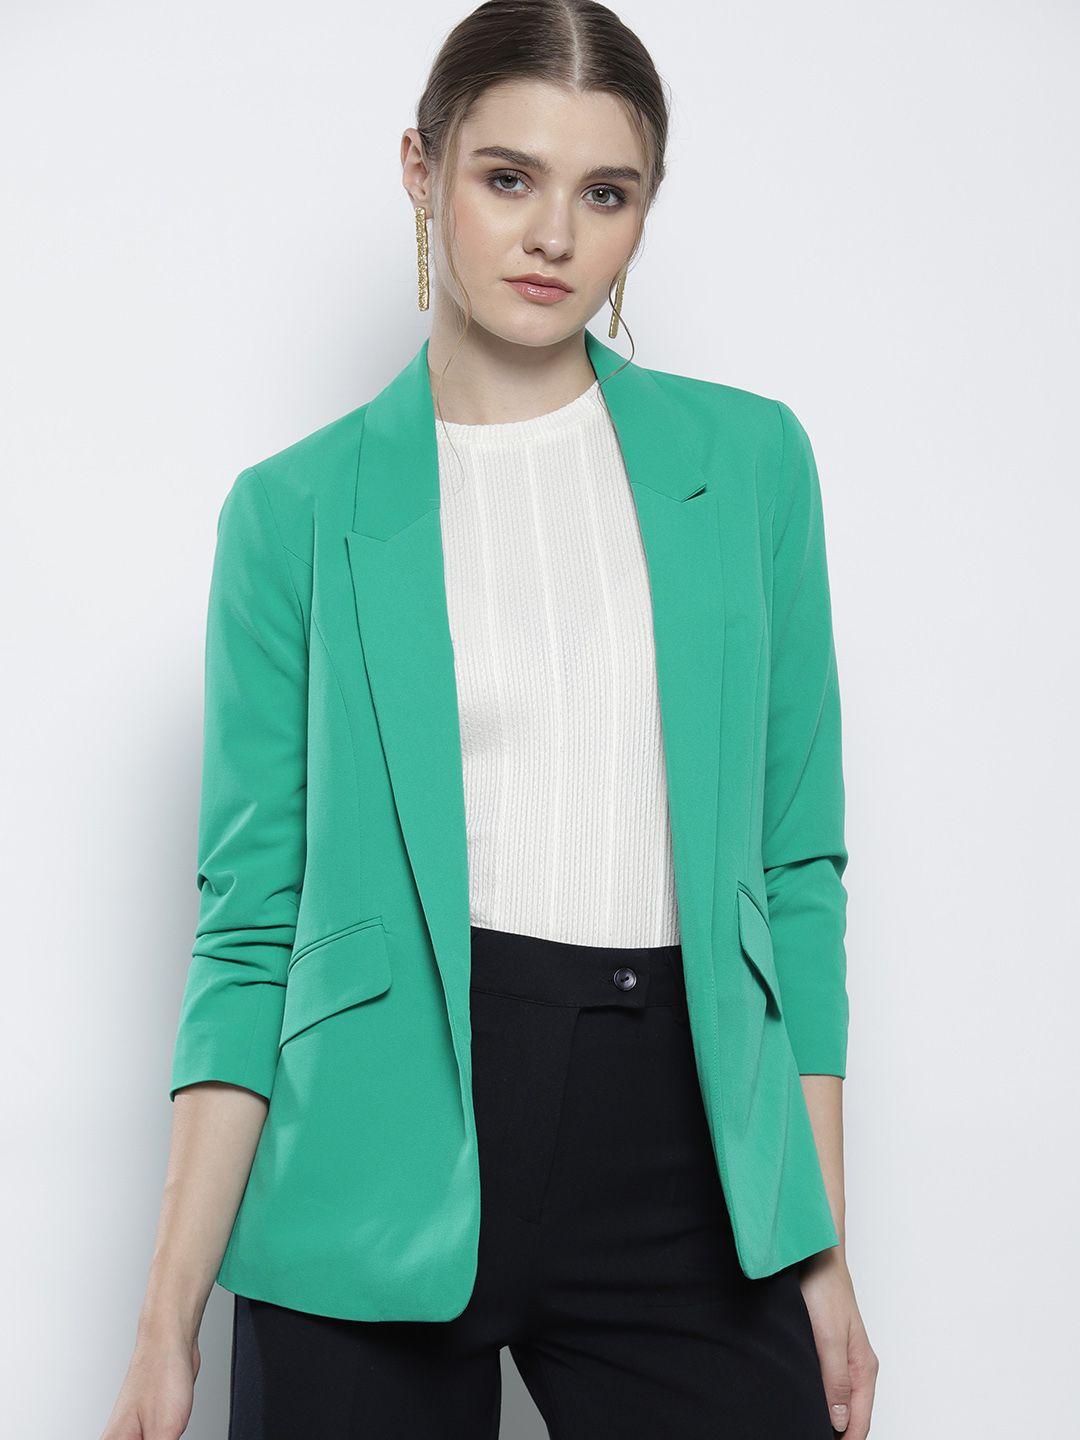 dorothy perkins ruched sleeves open front formal blazer